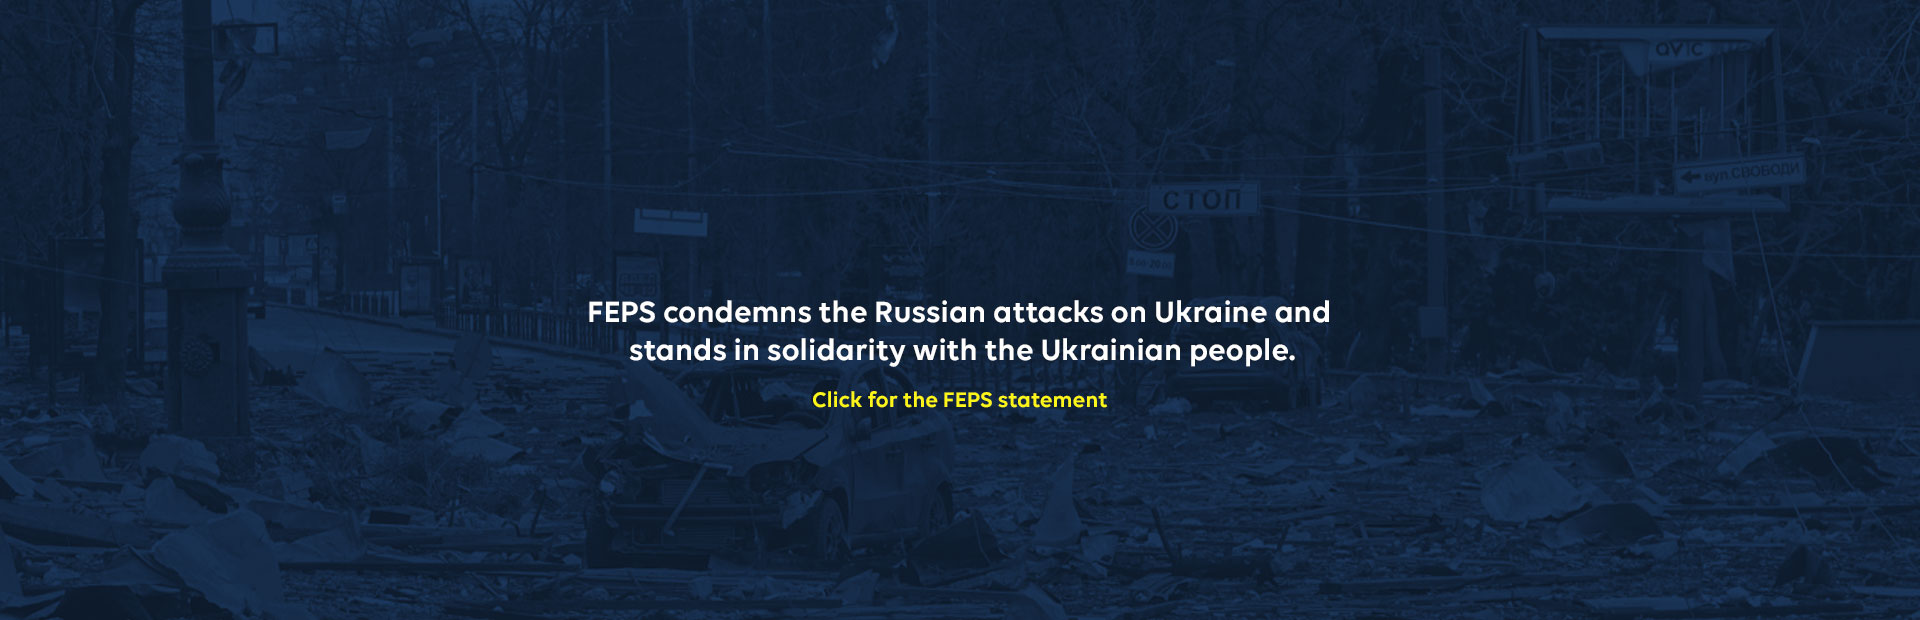 feps condemns the russian attacks